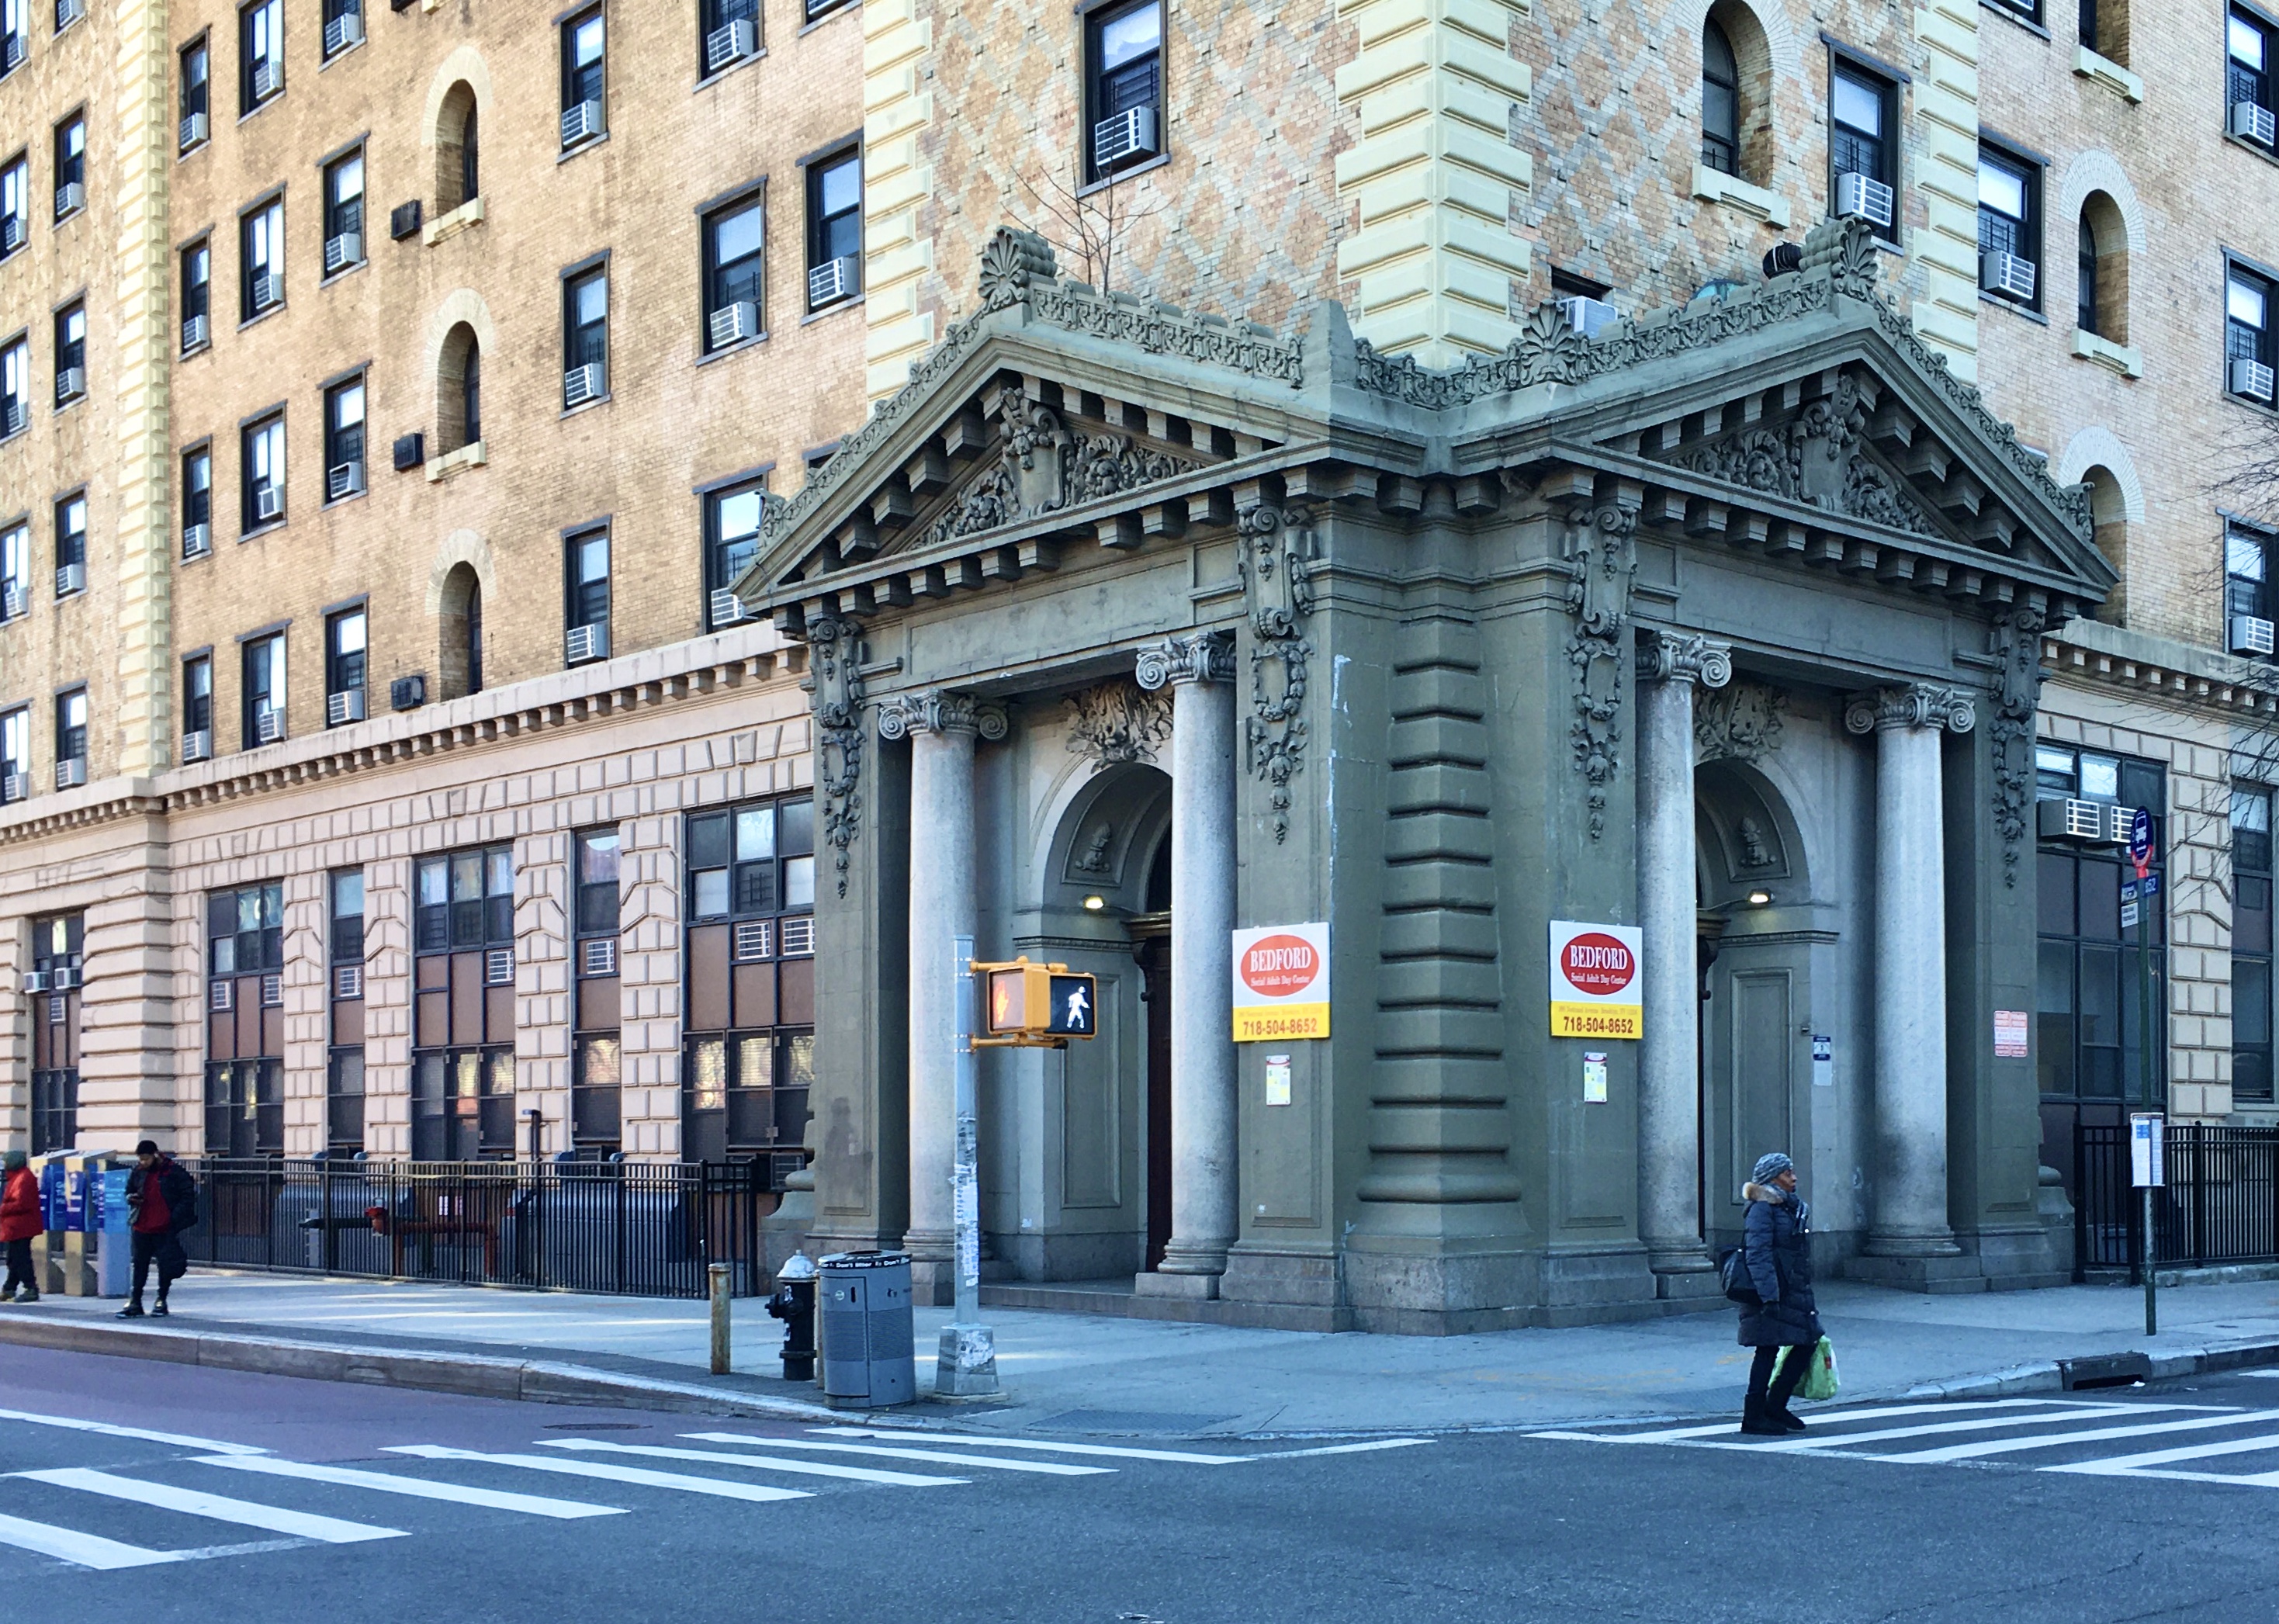 The corner entryway at 390 Nostrand Ave. is quite dramatic-looking. Photo: Lore Croghan/Brooklyn Eagle